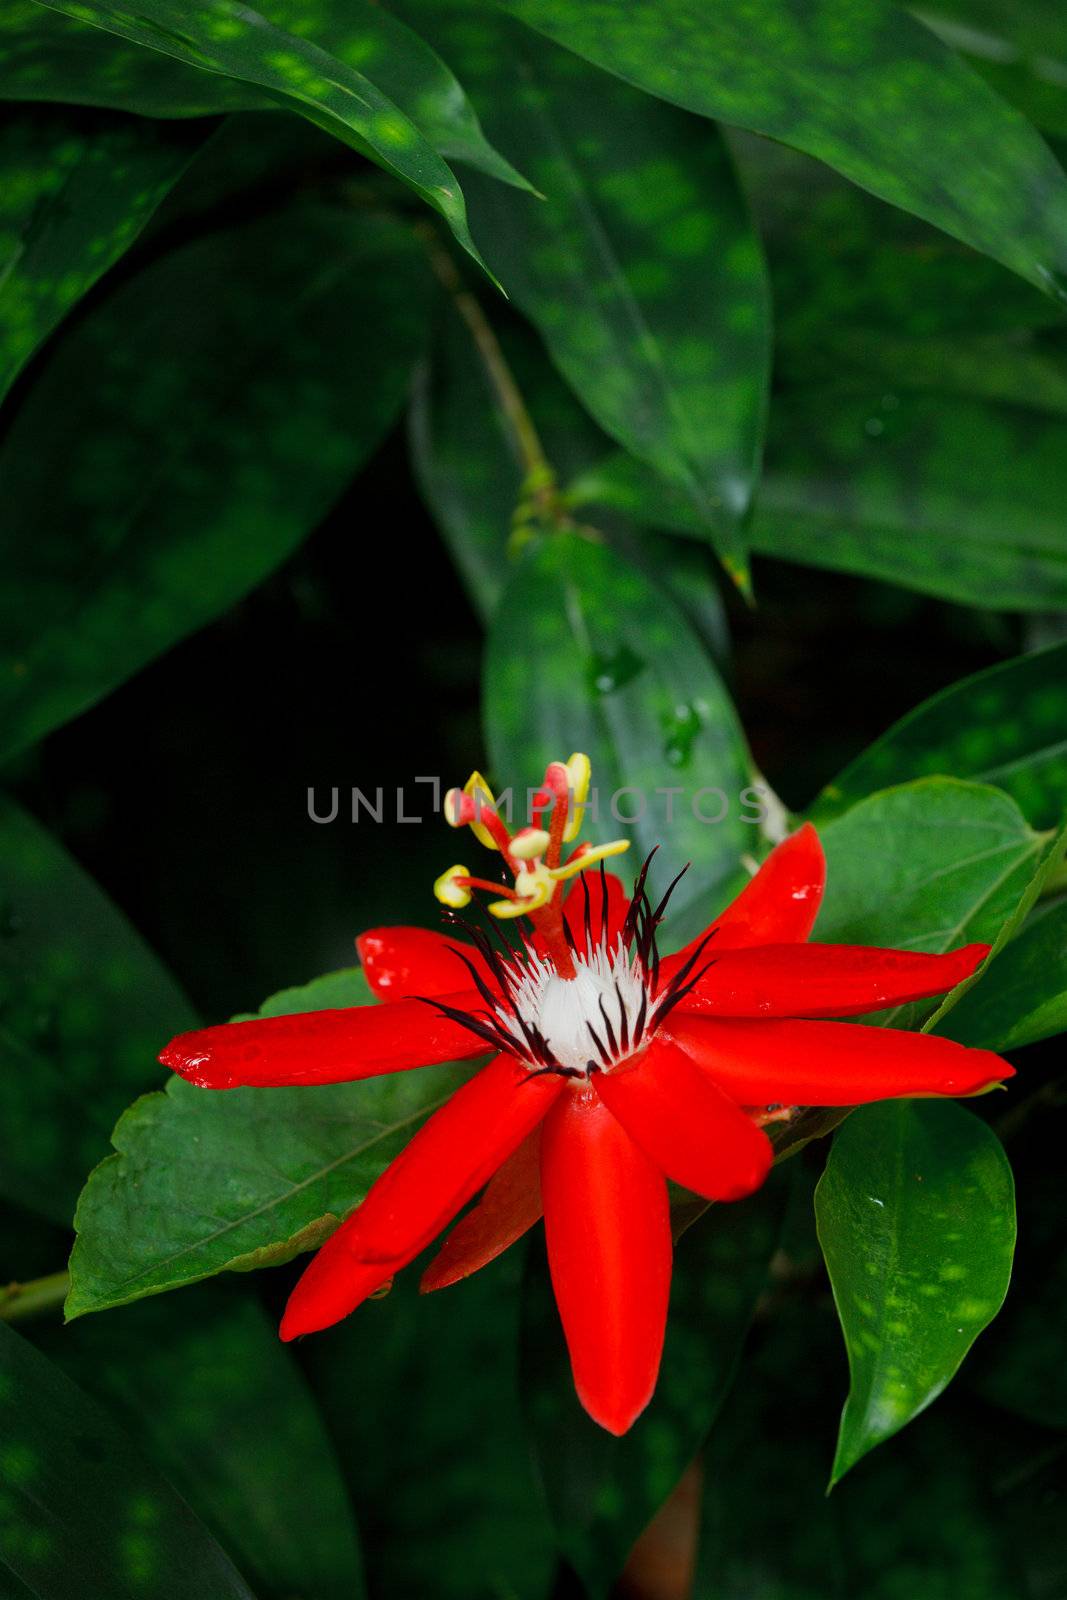 Red Passion Flower by dimol